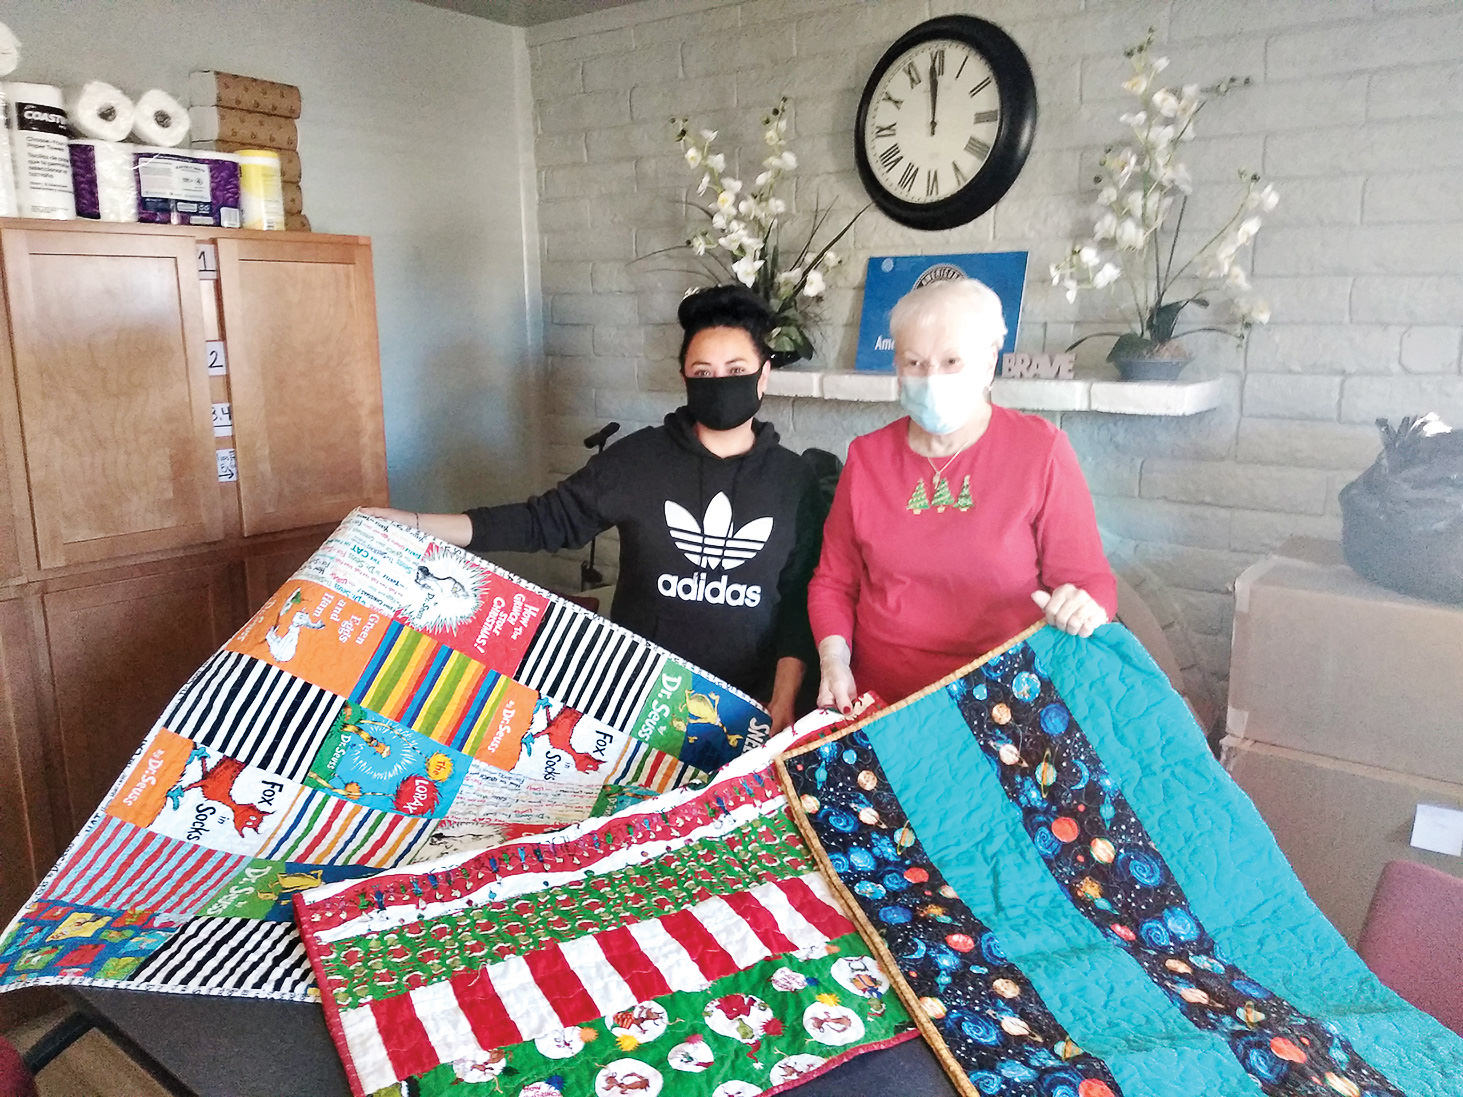 These are a few quilts made by Desert Threads members. Nancy Bonngard (right) presented 18 quilts recently to Nayre (left) at My Sister's Place.